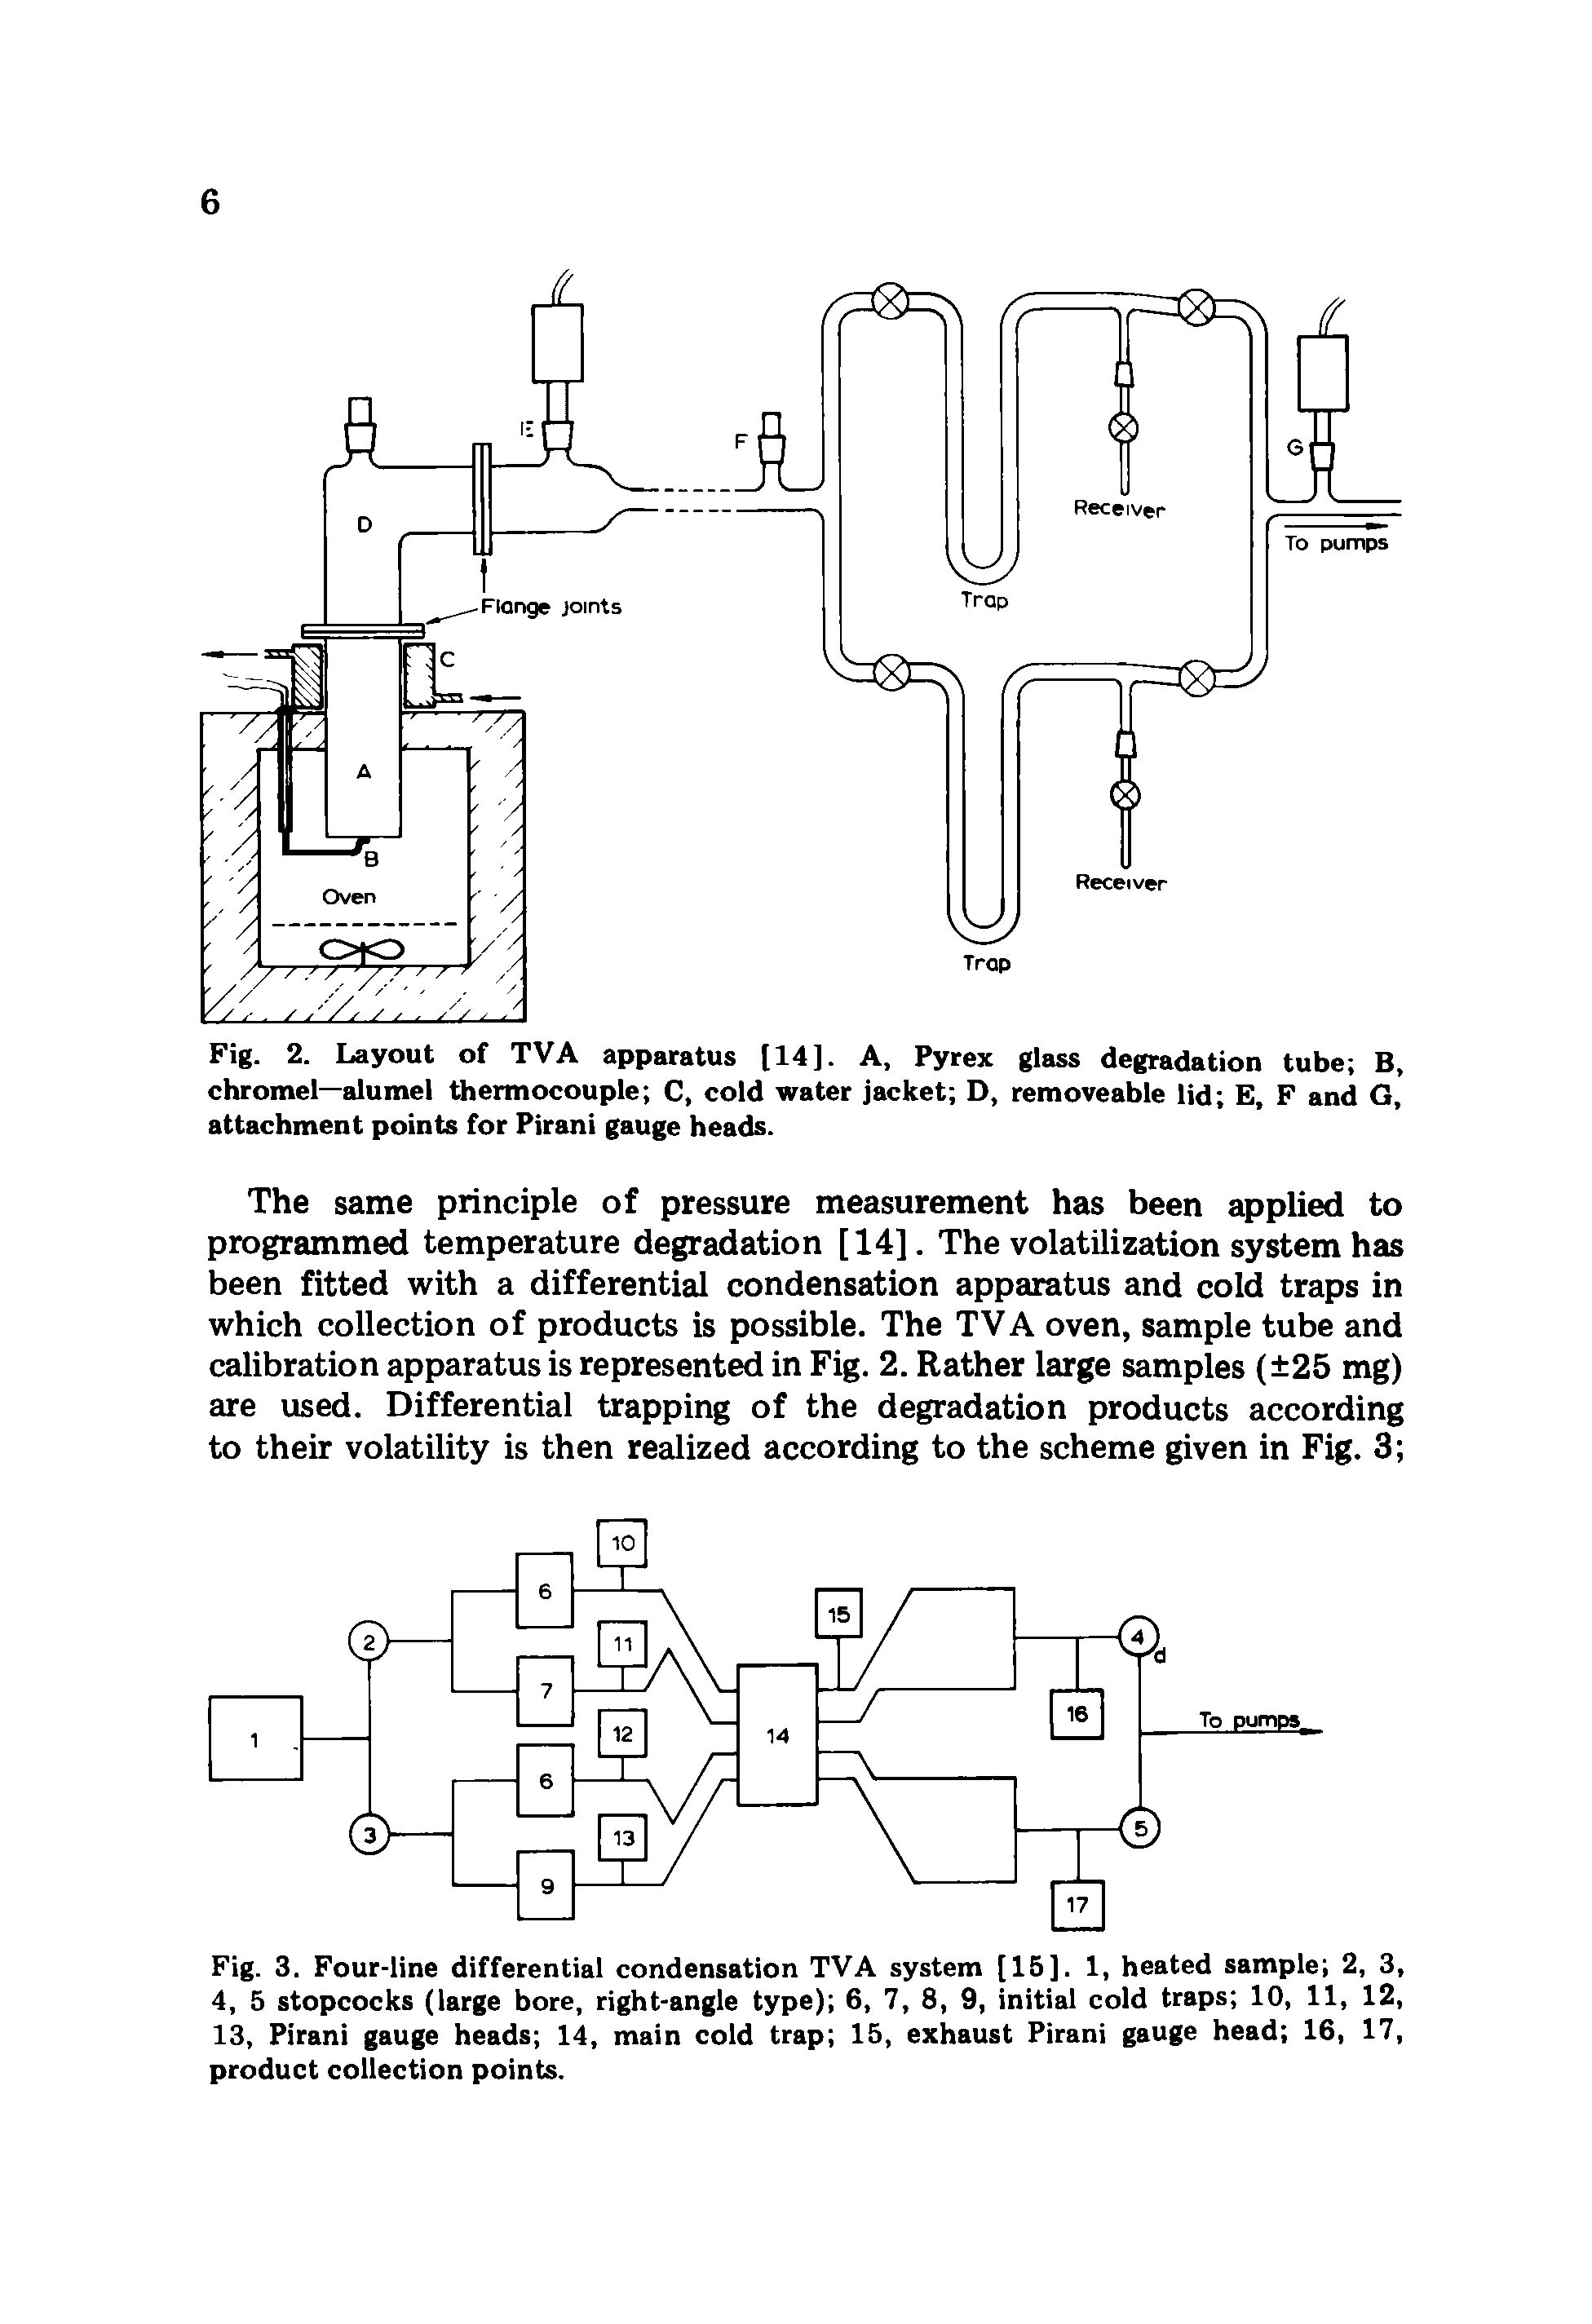 Fig. 2. Layout of TVA apparatus [14]. A, Pyrex glass degradation tube B, chromel—alumel thermocouple C, cold water jacket D, removeable lid E, F and G, attachment points for Pirani gauge heads.